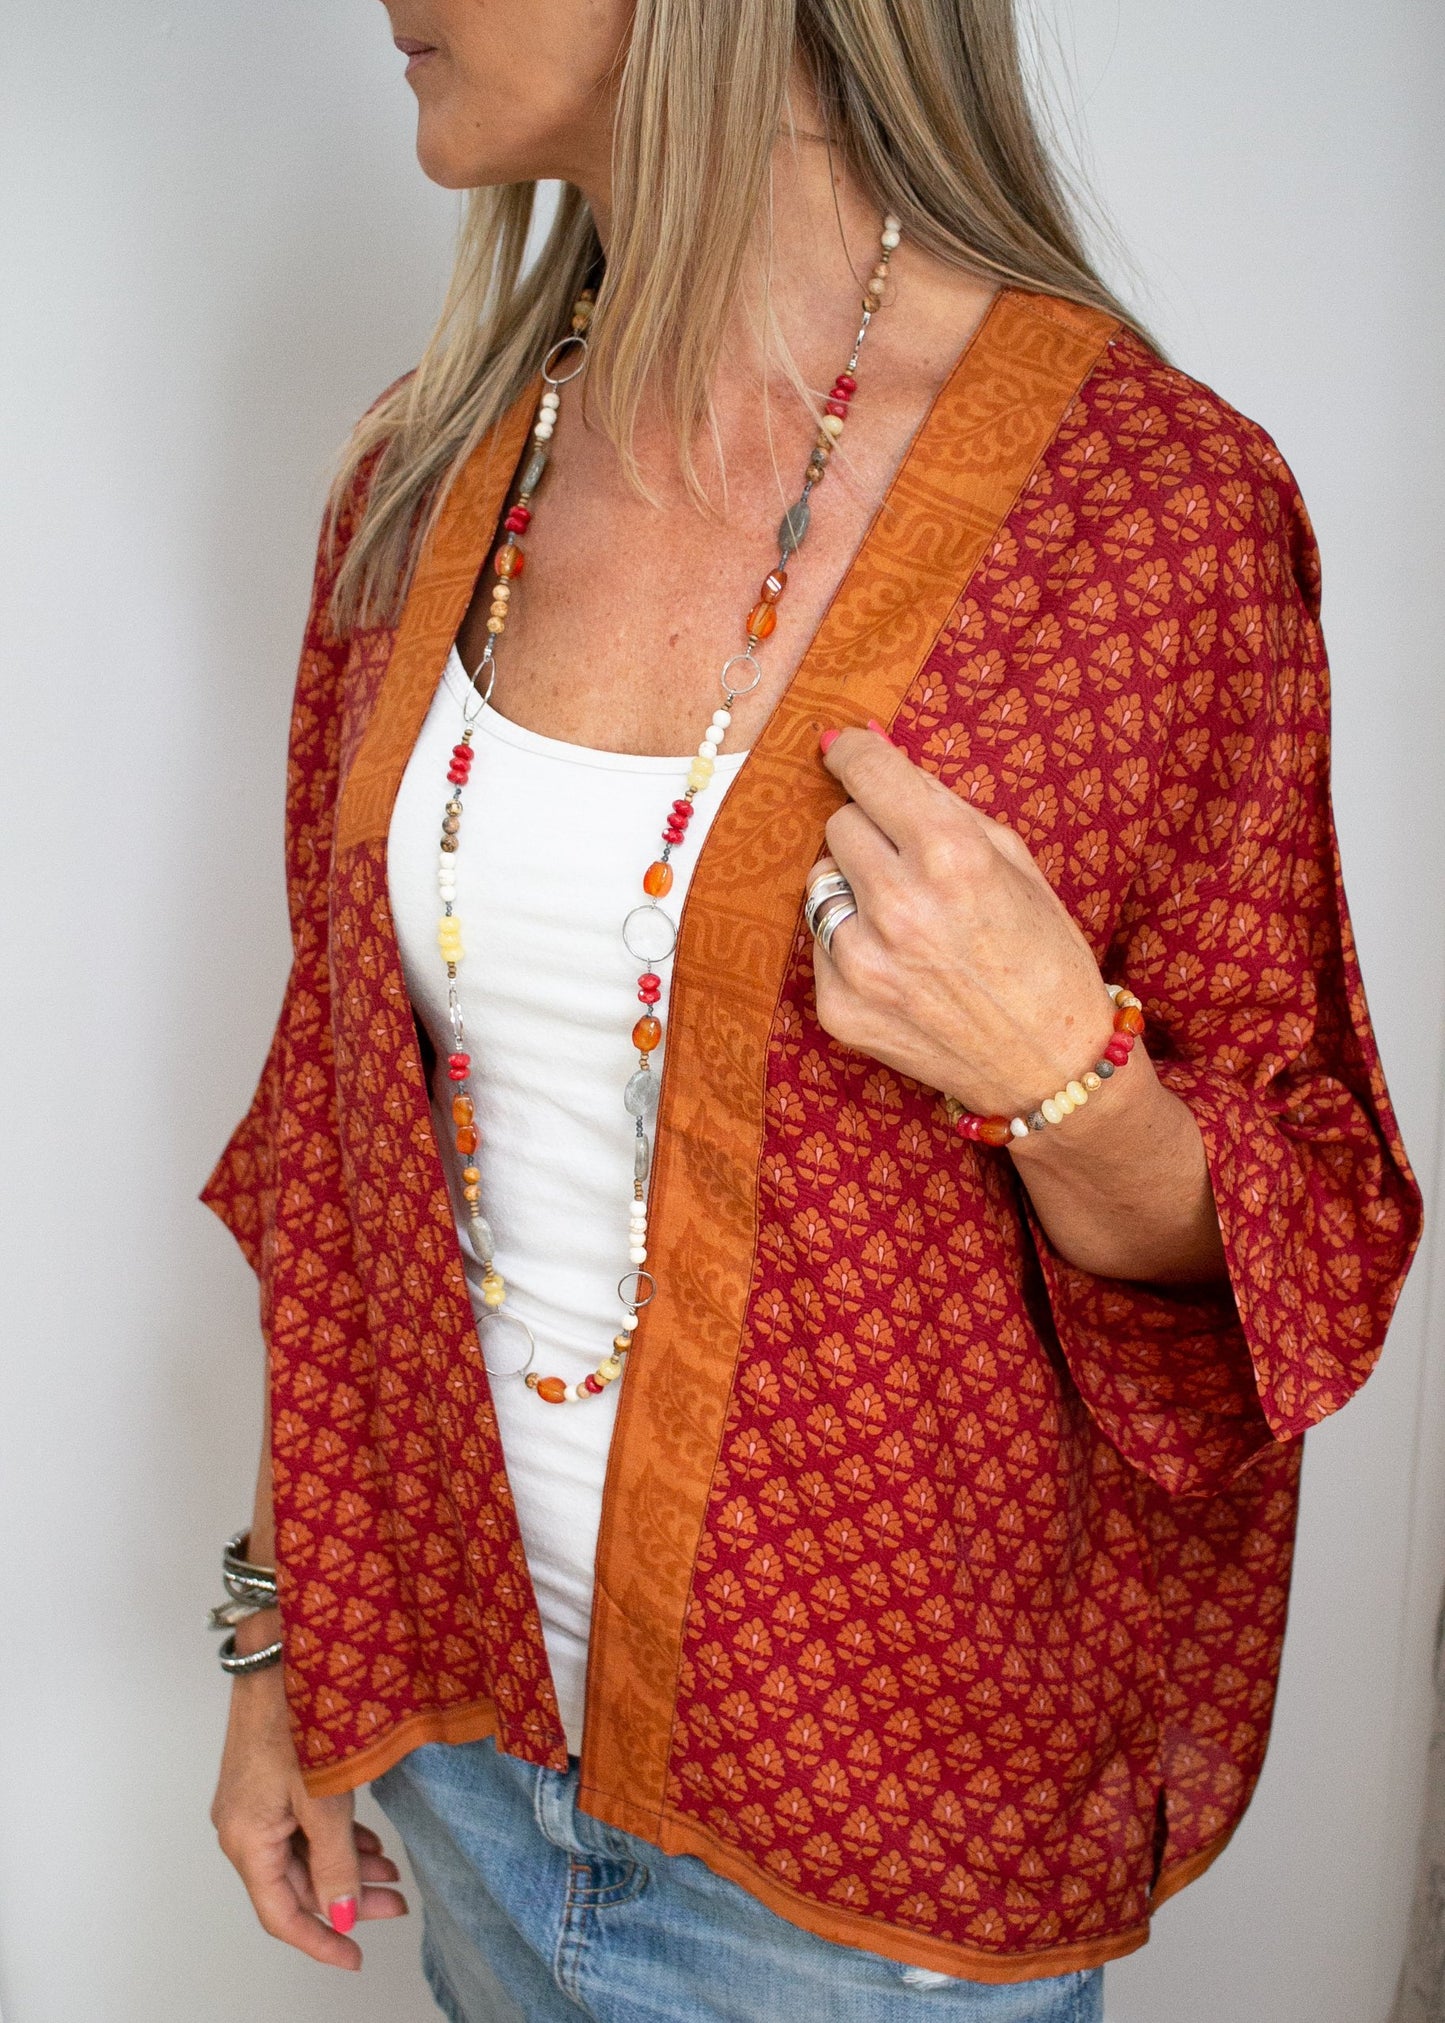 a woman wearing a deep red muse jacket with a repeating geometric floral pattern in a paler red. the trip around the front is a bold orange. She pairs the jacket with match orange and red jewellery 